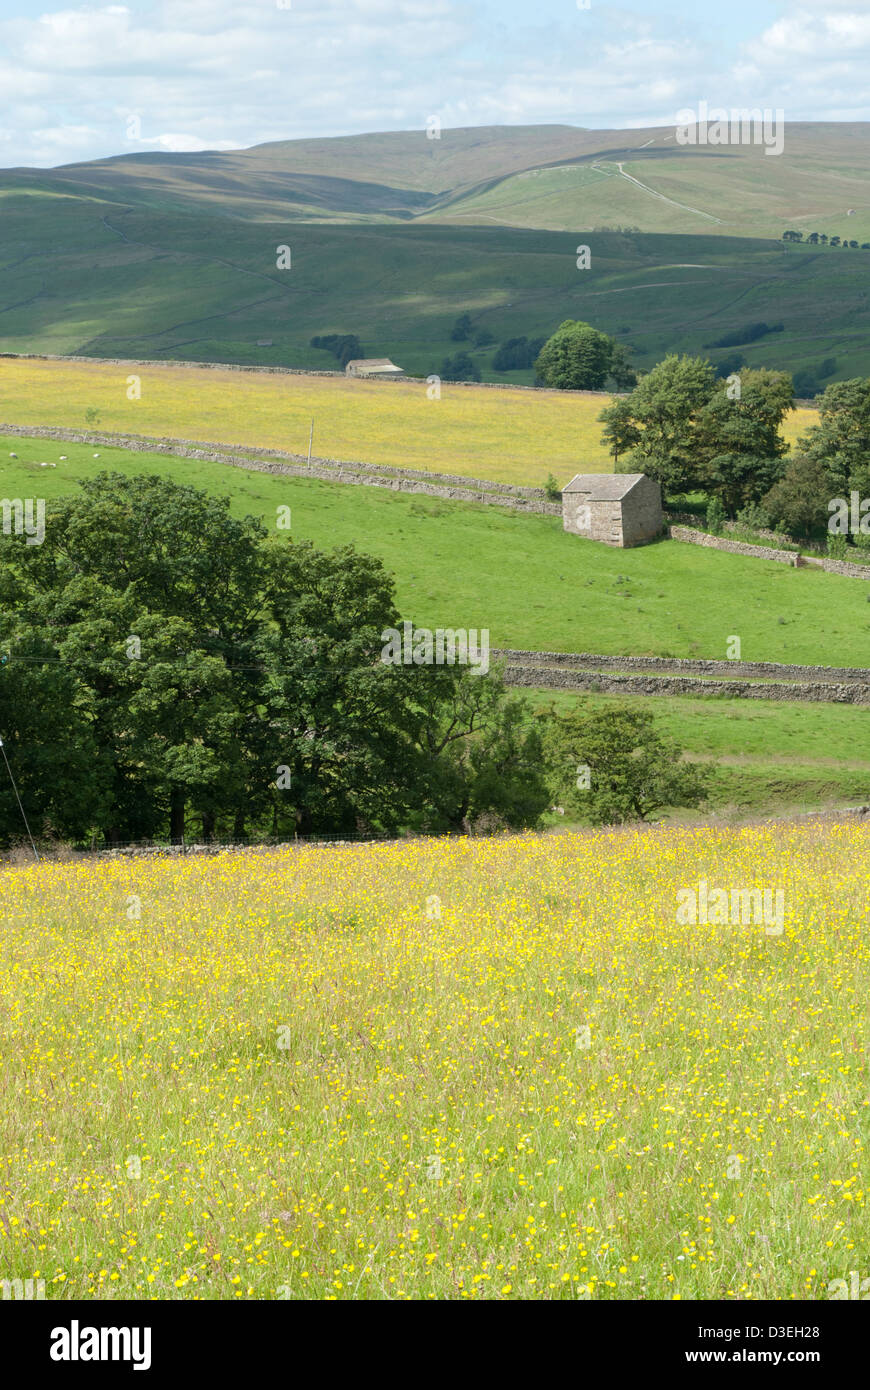 View of Wensleydale, with Stags Fell in distance, near Hawes, Yorkshire Dales National Park, England Stock Photo